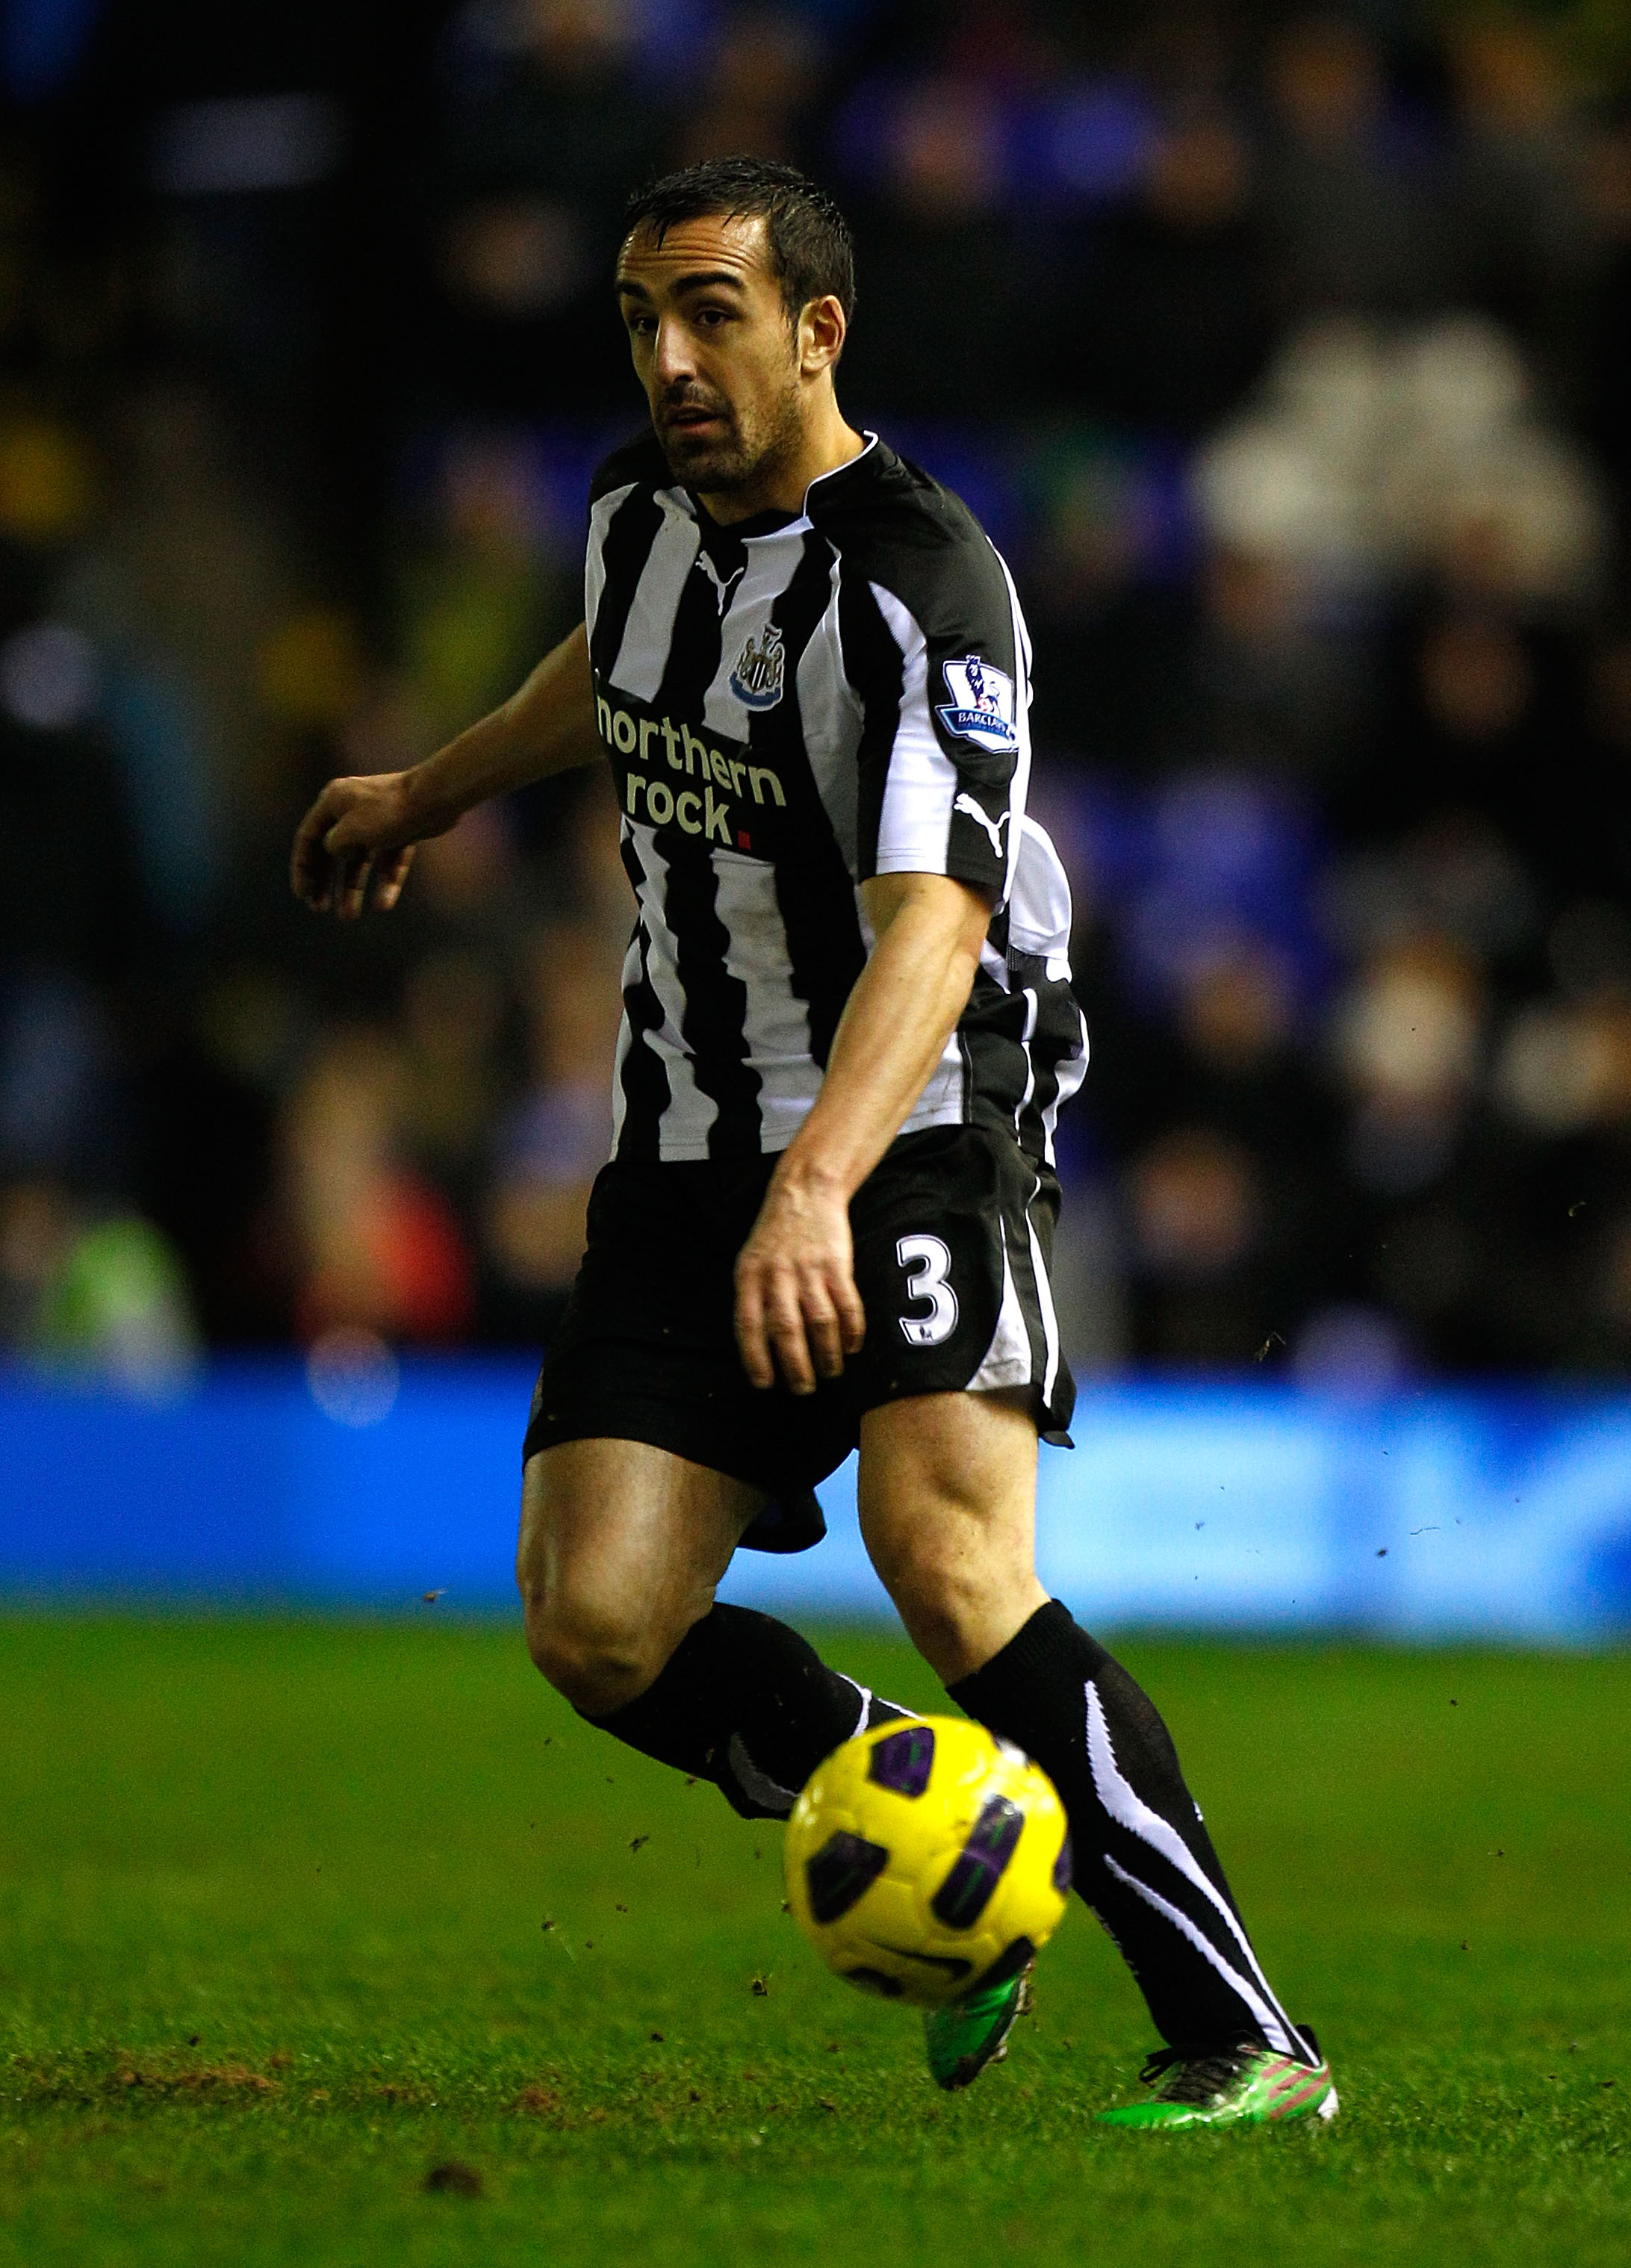 BIRMINGHAM, ENGLAND - FEBRUARY 15:  Newcastle defender Jose Enrique in action during the Barclays Premier League match between Birmingham City and Newcastle United at St Andrews on February 15, 2011 in Birmingham, England.  (Photo by Stu Forster/Getty Ima